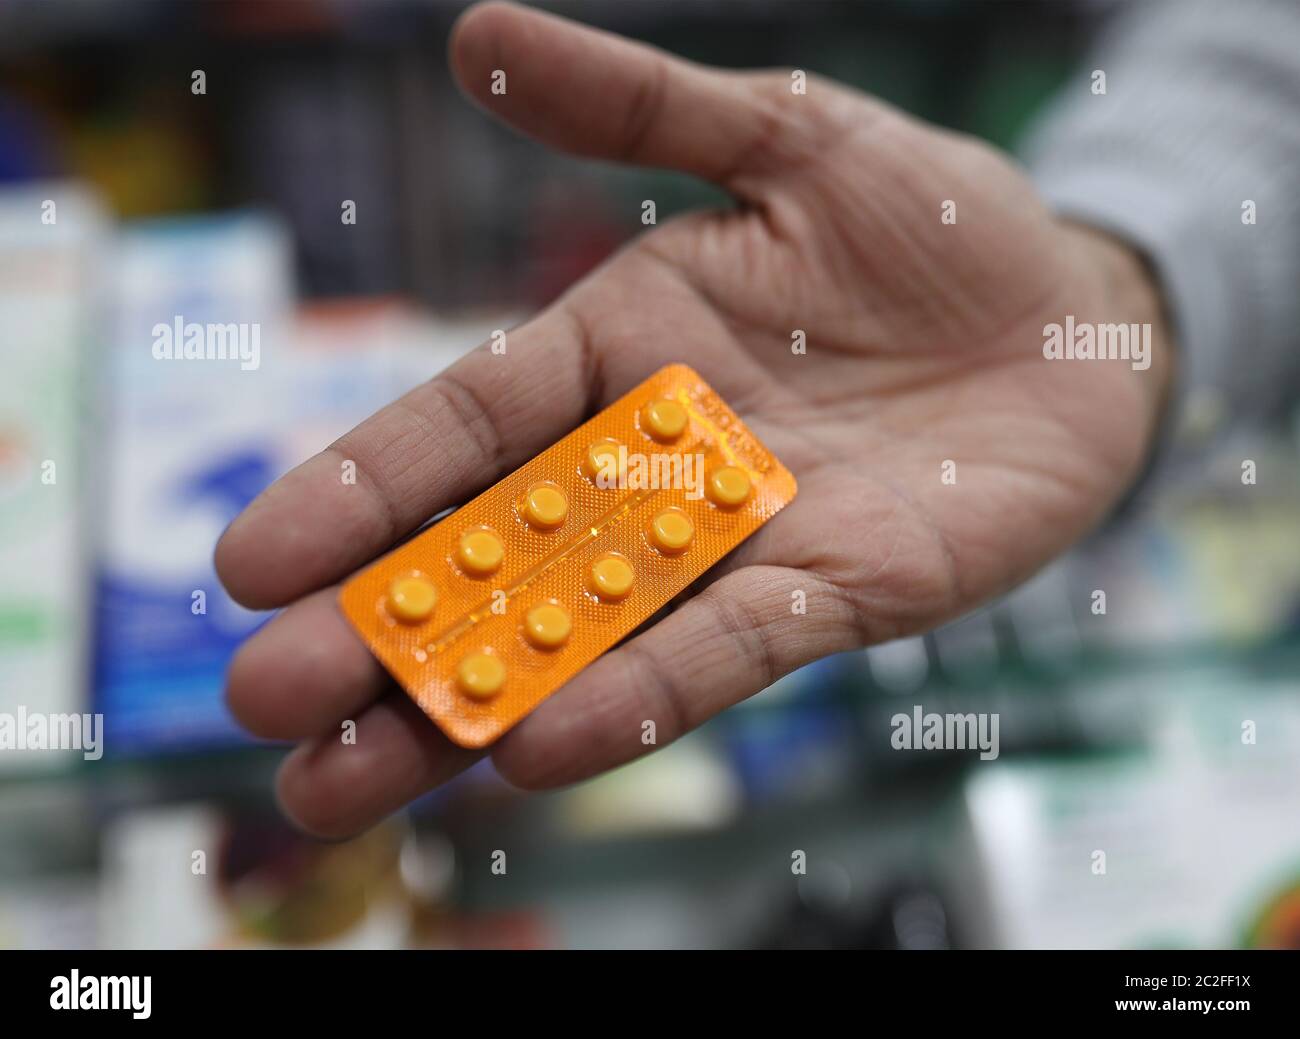 A member of staff at a pharmacy in London holds a packet of anti-inflammatory drug dexamethasone, which has been hailed as a ground-breaking treatment for hospital patients seriously ill with Covid-19. Researchers have found that the drug reduces deaths by up to a third among patients on ventilators and by a fifth for those on oxygen. Stock Photo